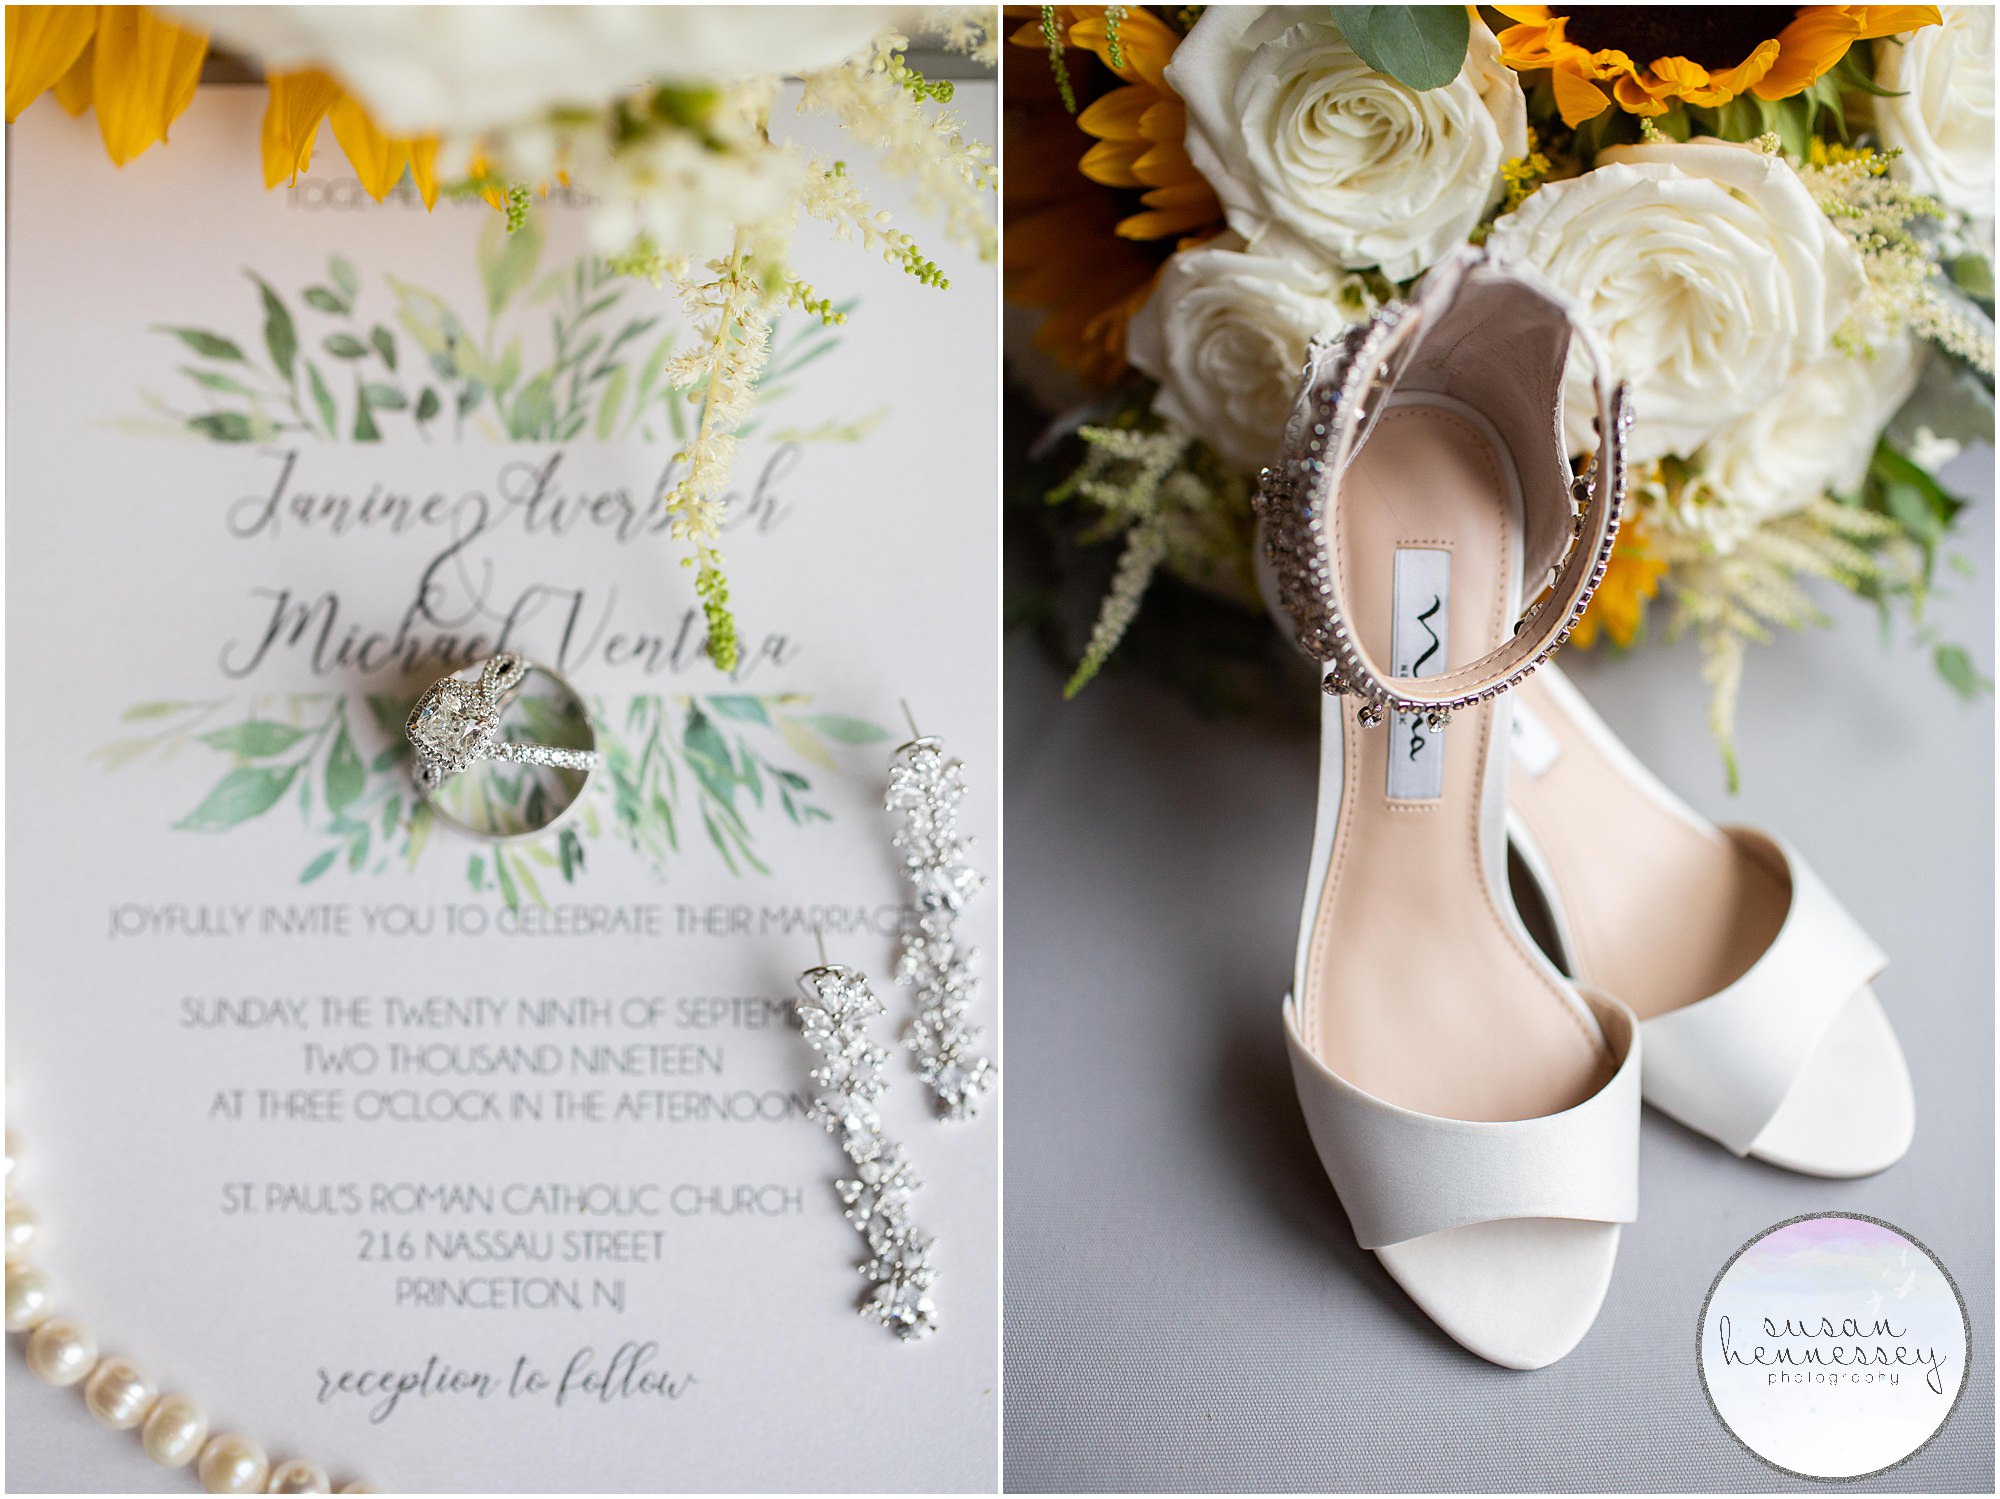 Detail of bride's Nina Shoes, wedding invitation, rings and earrings.